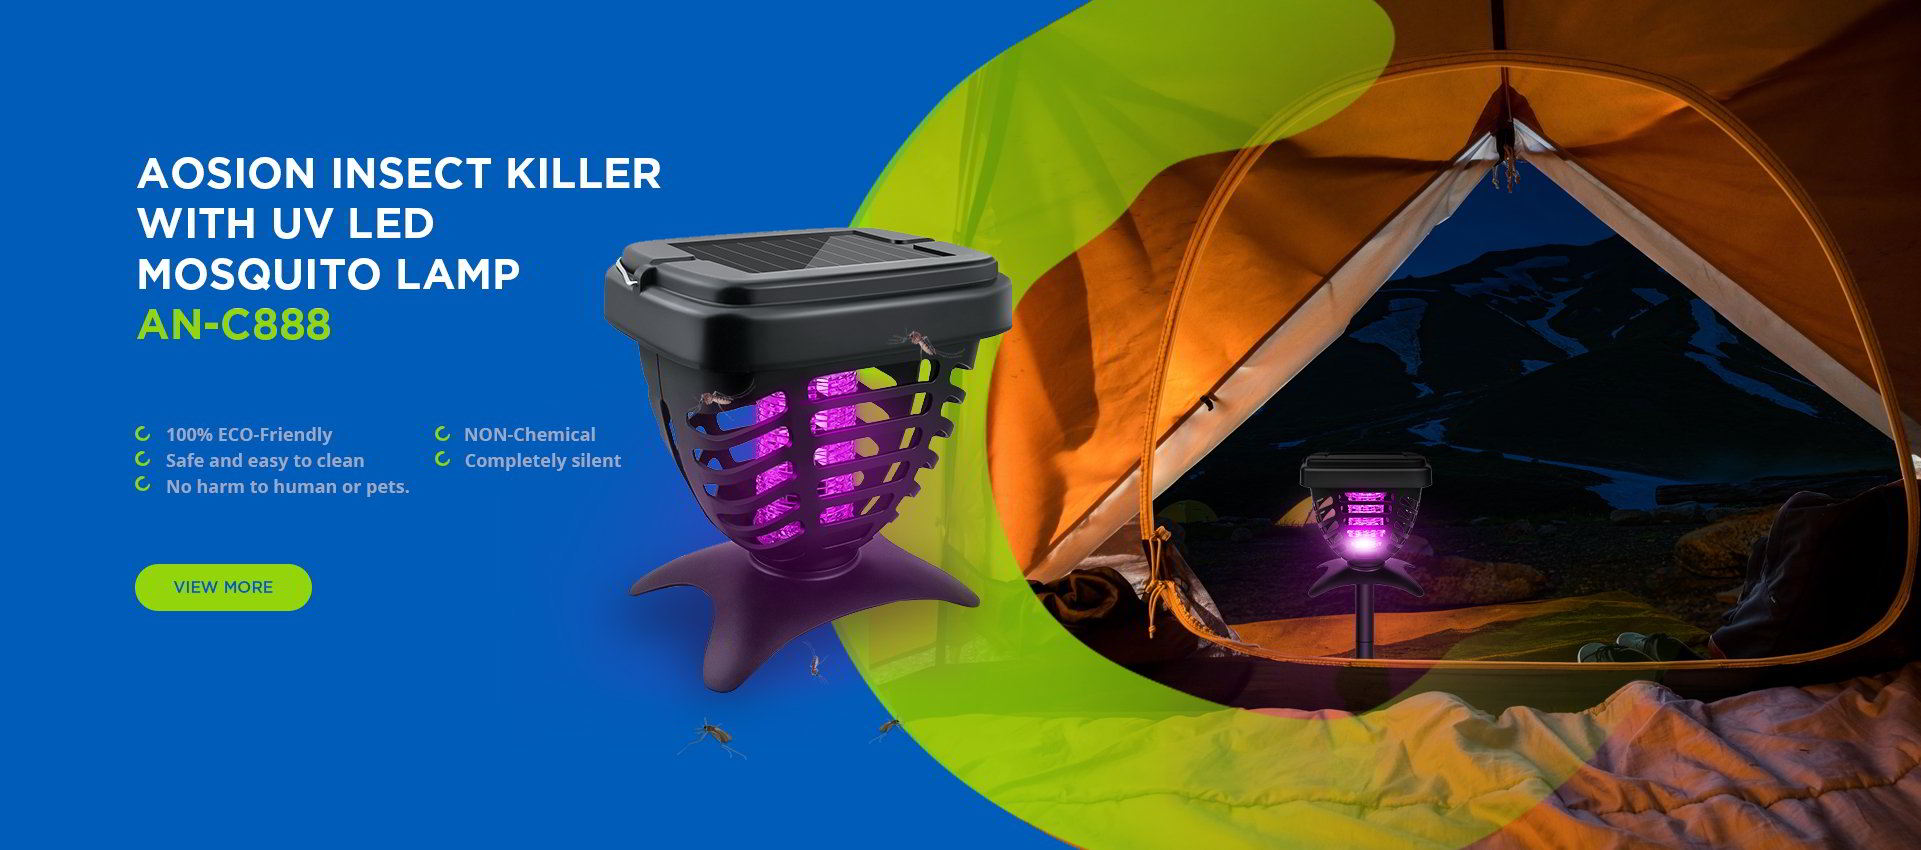 AOSION Insect Killer with UV LED Mosquito Lamp